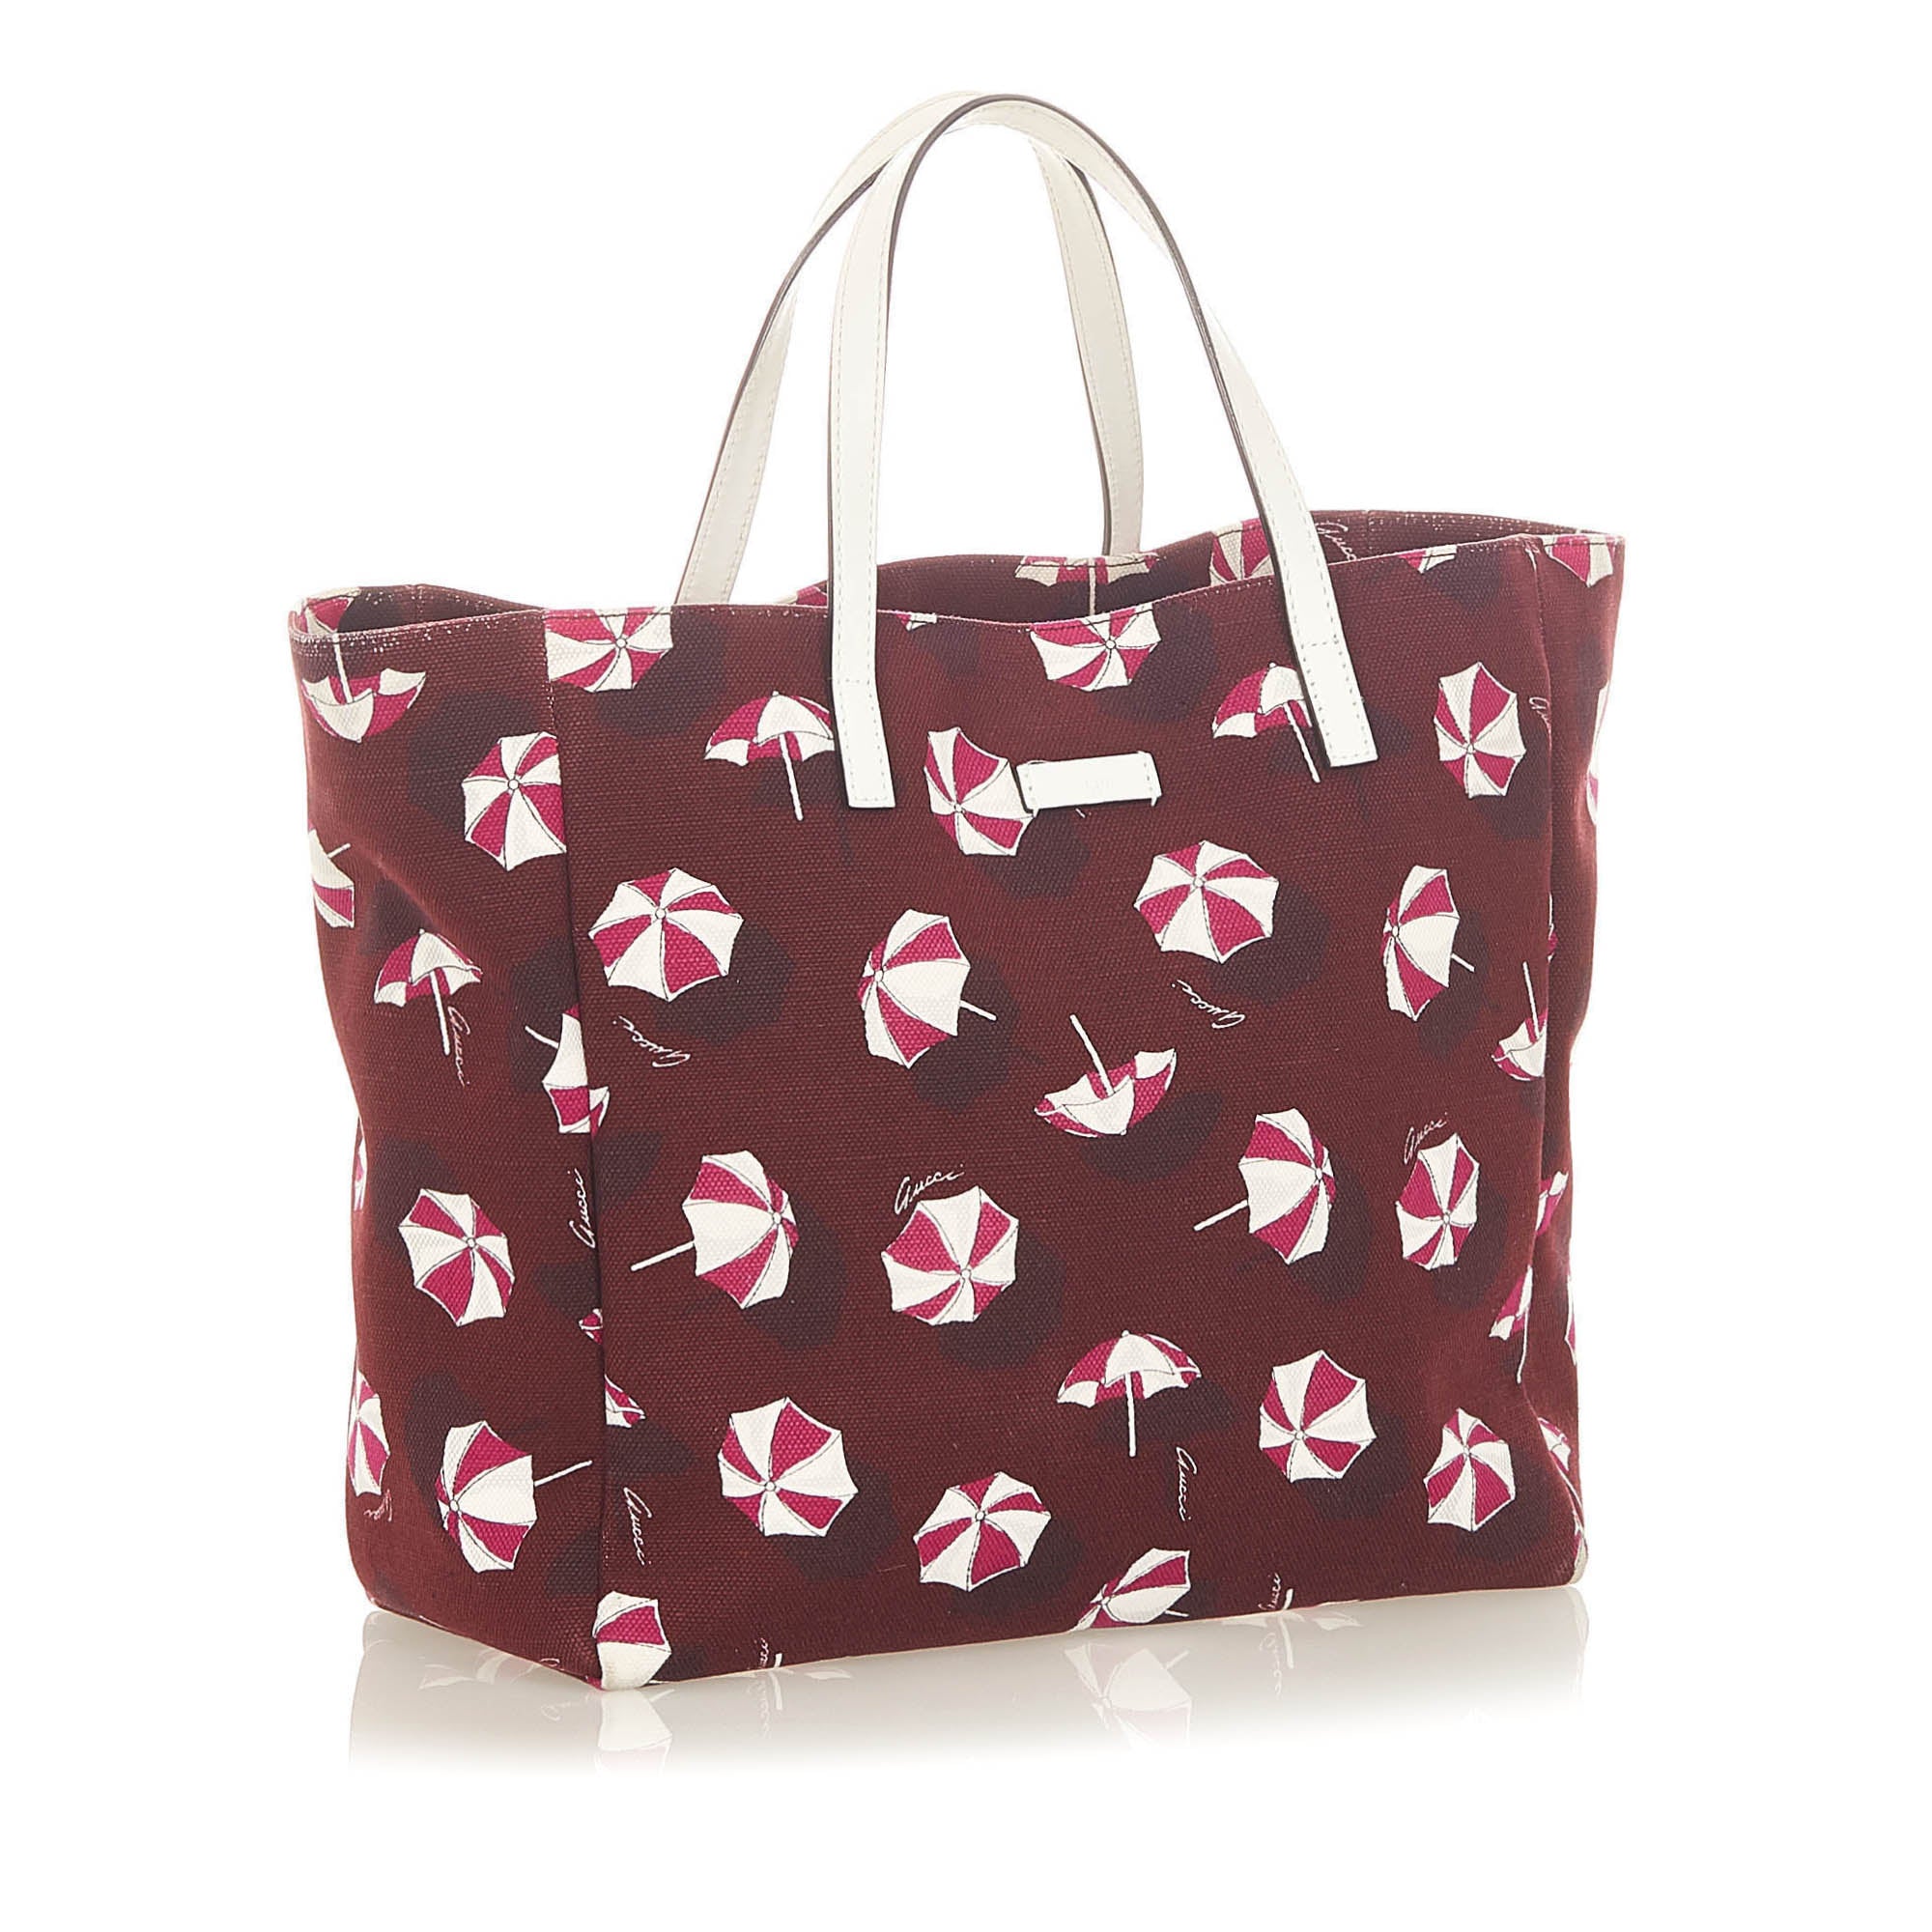 Gucci 100% Canvas Red Printed Canvas Tote Bag One Size - 42% off